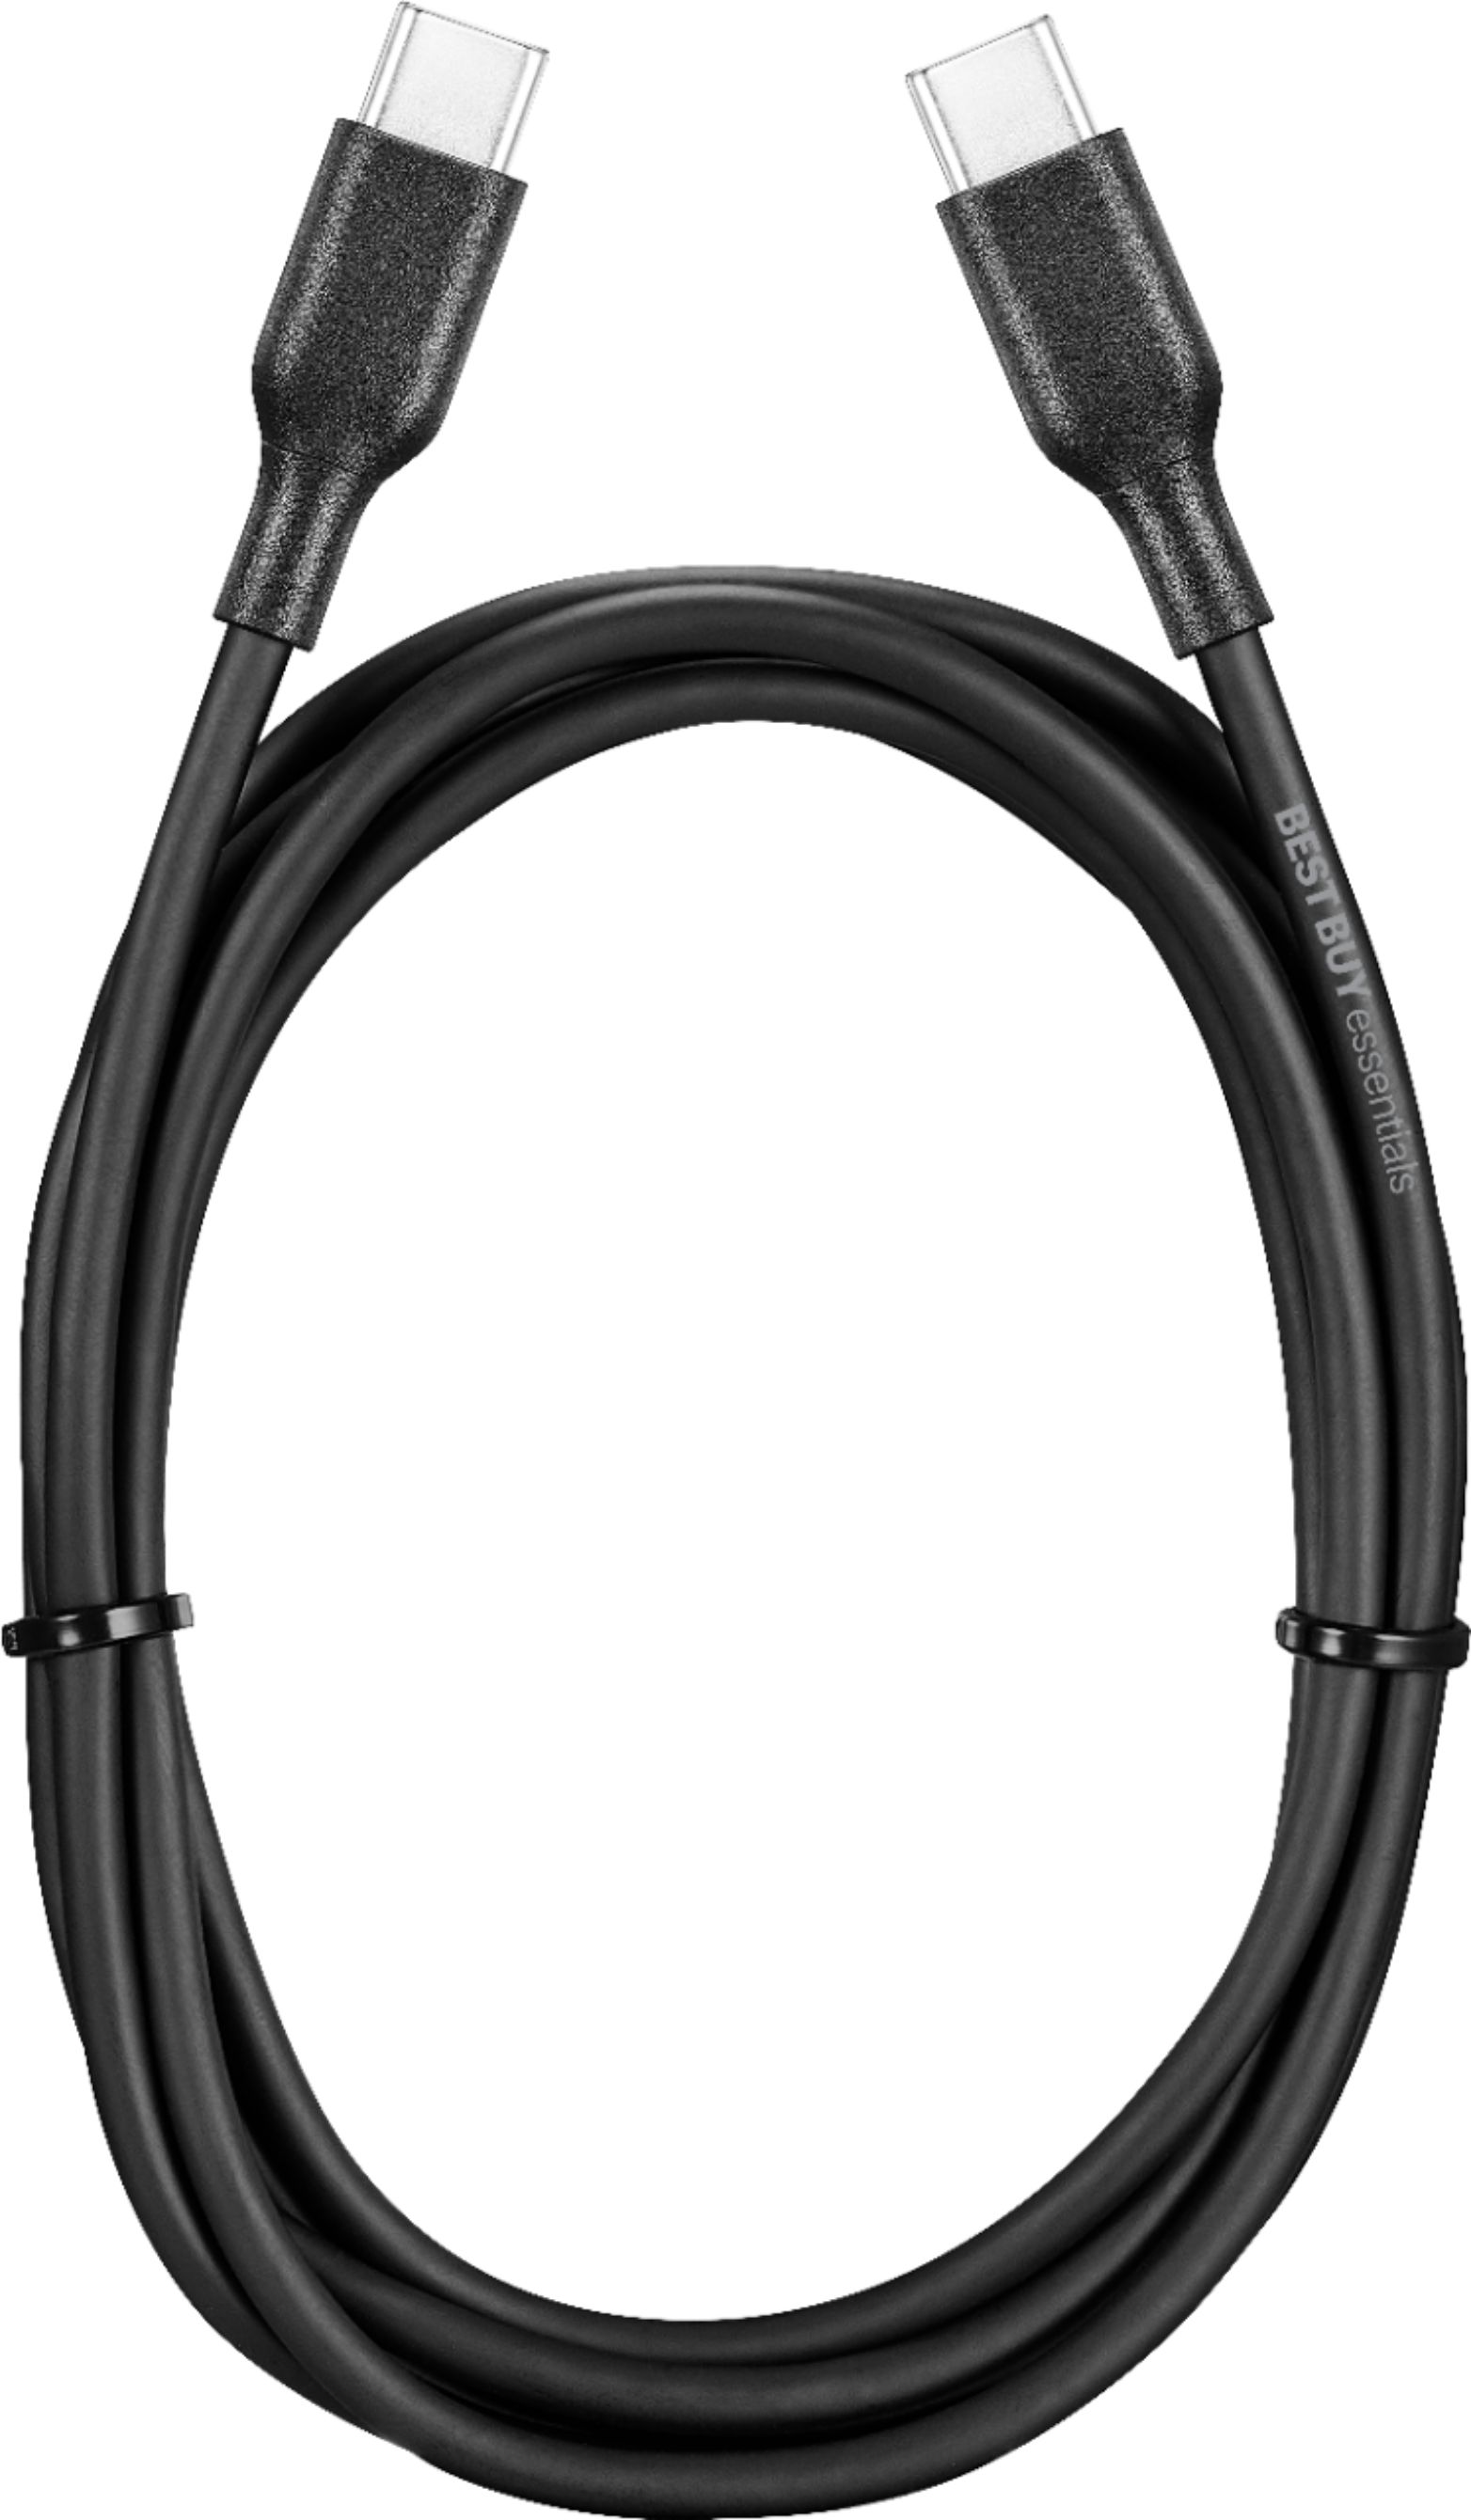 Best Buy essentials™ 3' USB-A to USB-C Charge-and-Sync Cable Black